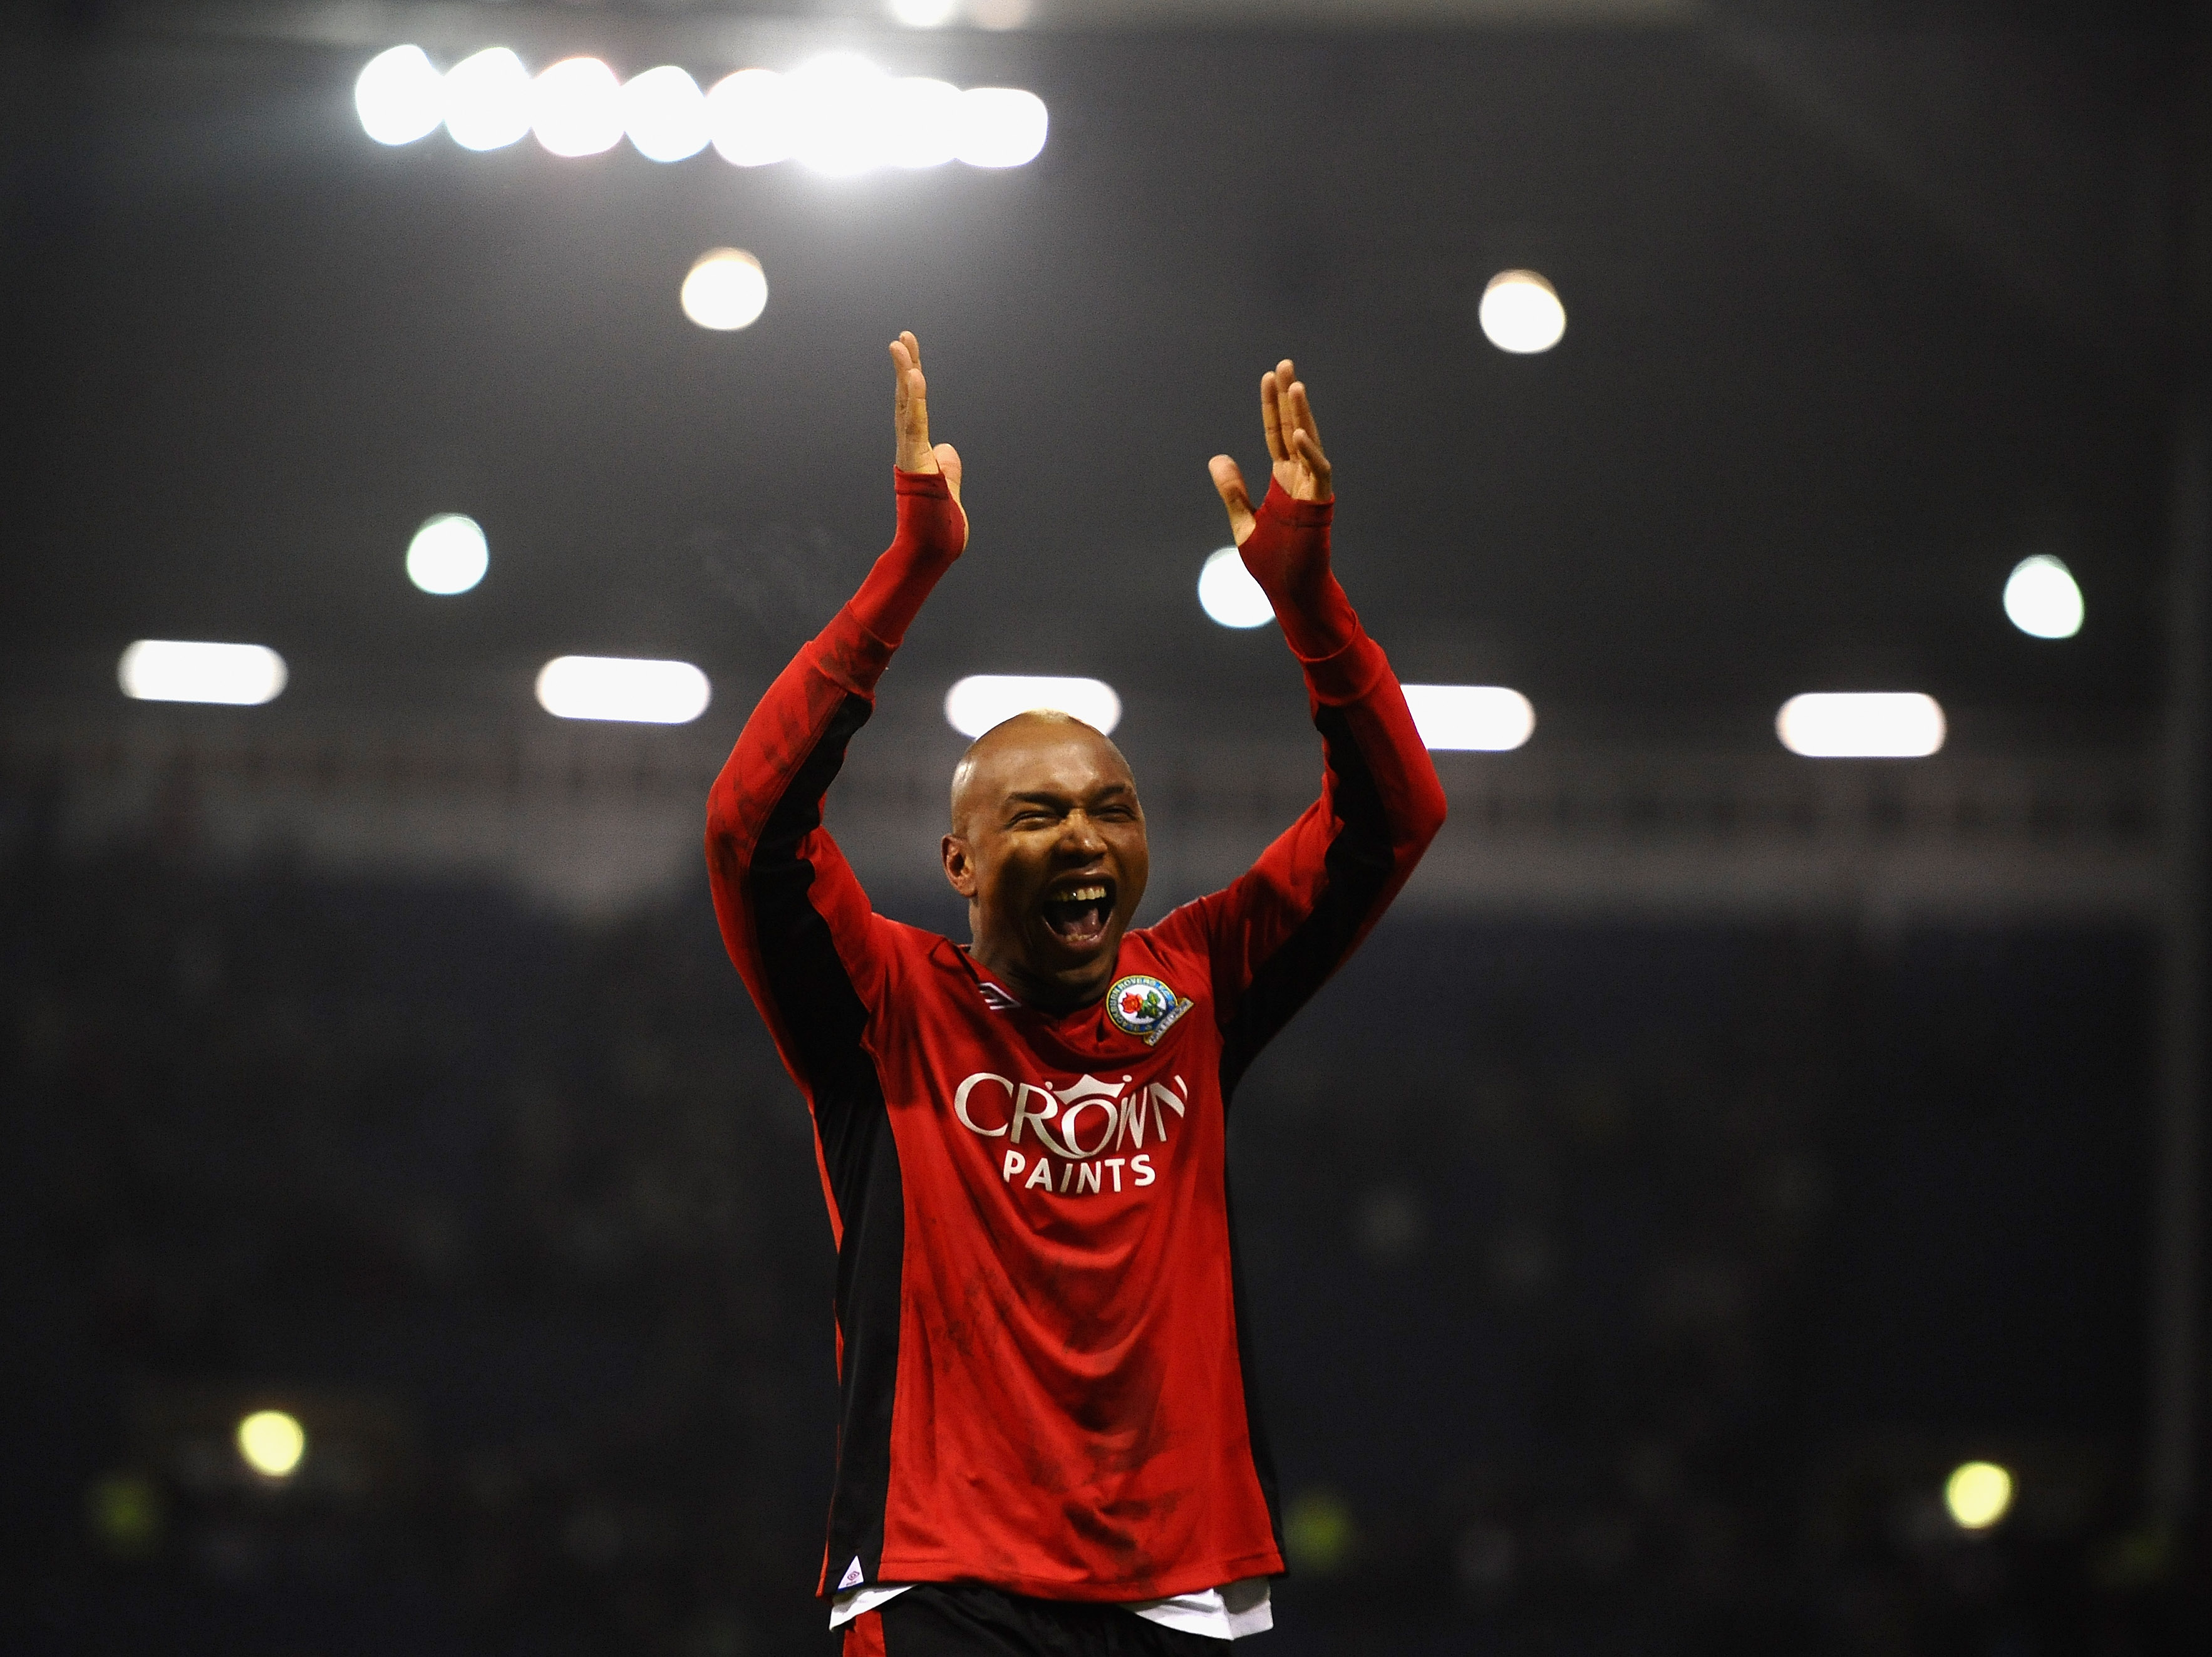 WEST BROMWICH, ENGLAND - DECEMBER 28:  El-Hadji Diouf of Blackburn Rovers celebrates an away victory during the Barclays Premier League match between West Bromwich Albion and Blackburn Rovers at The Hawthorns on December 28, 2010 in West Bromwich, England